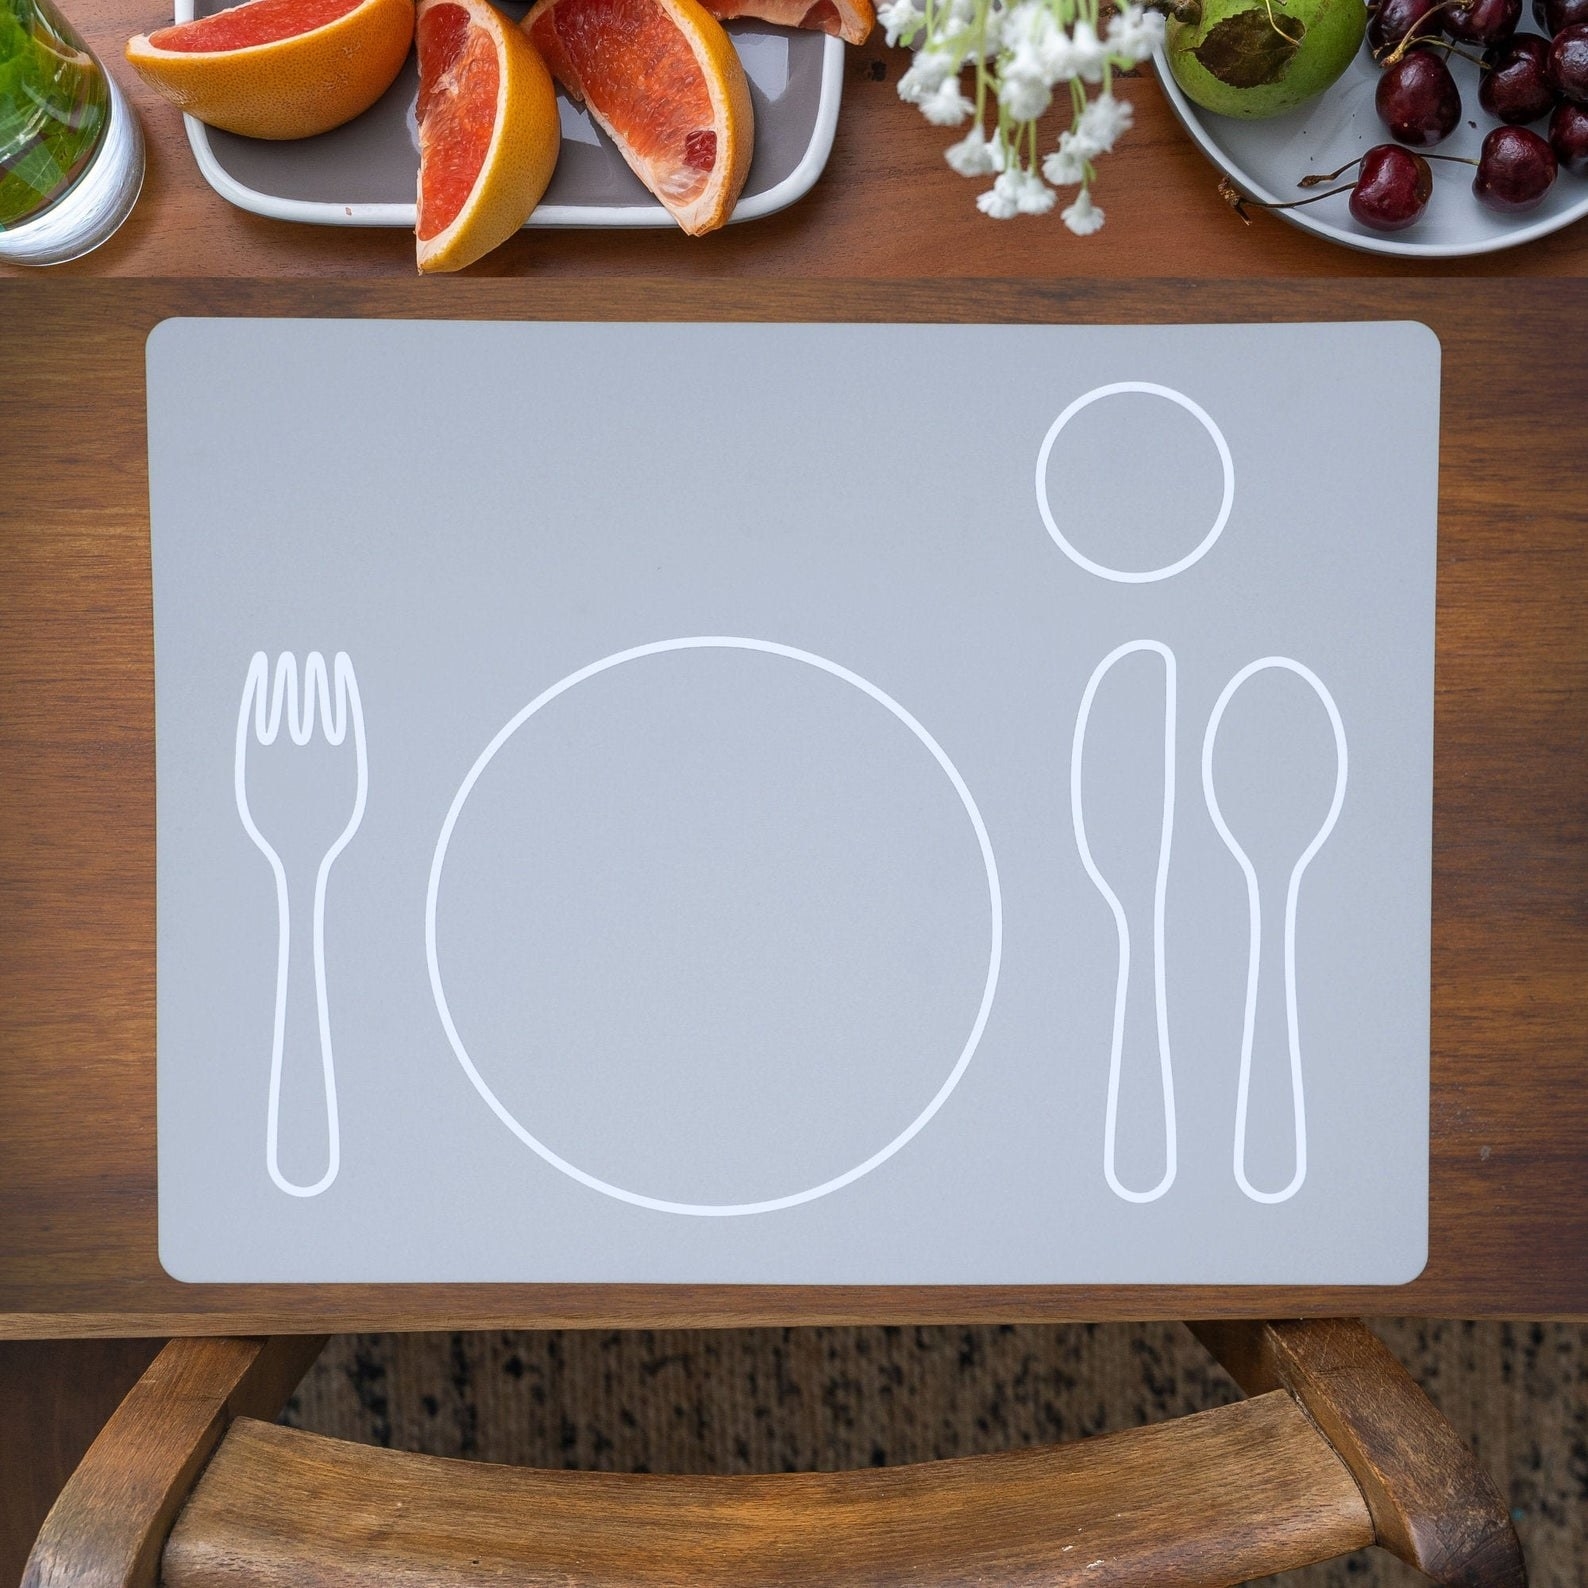 The grey silicone mat with marking to guide children to set the table